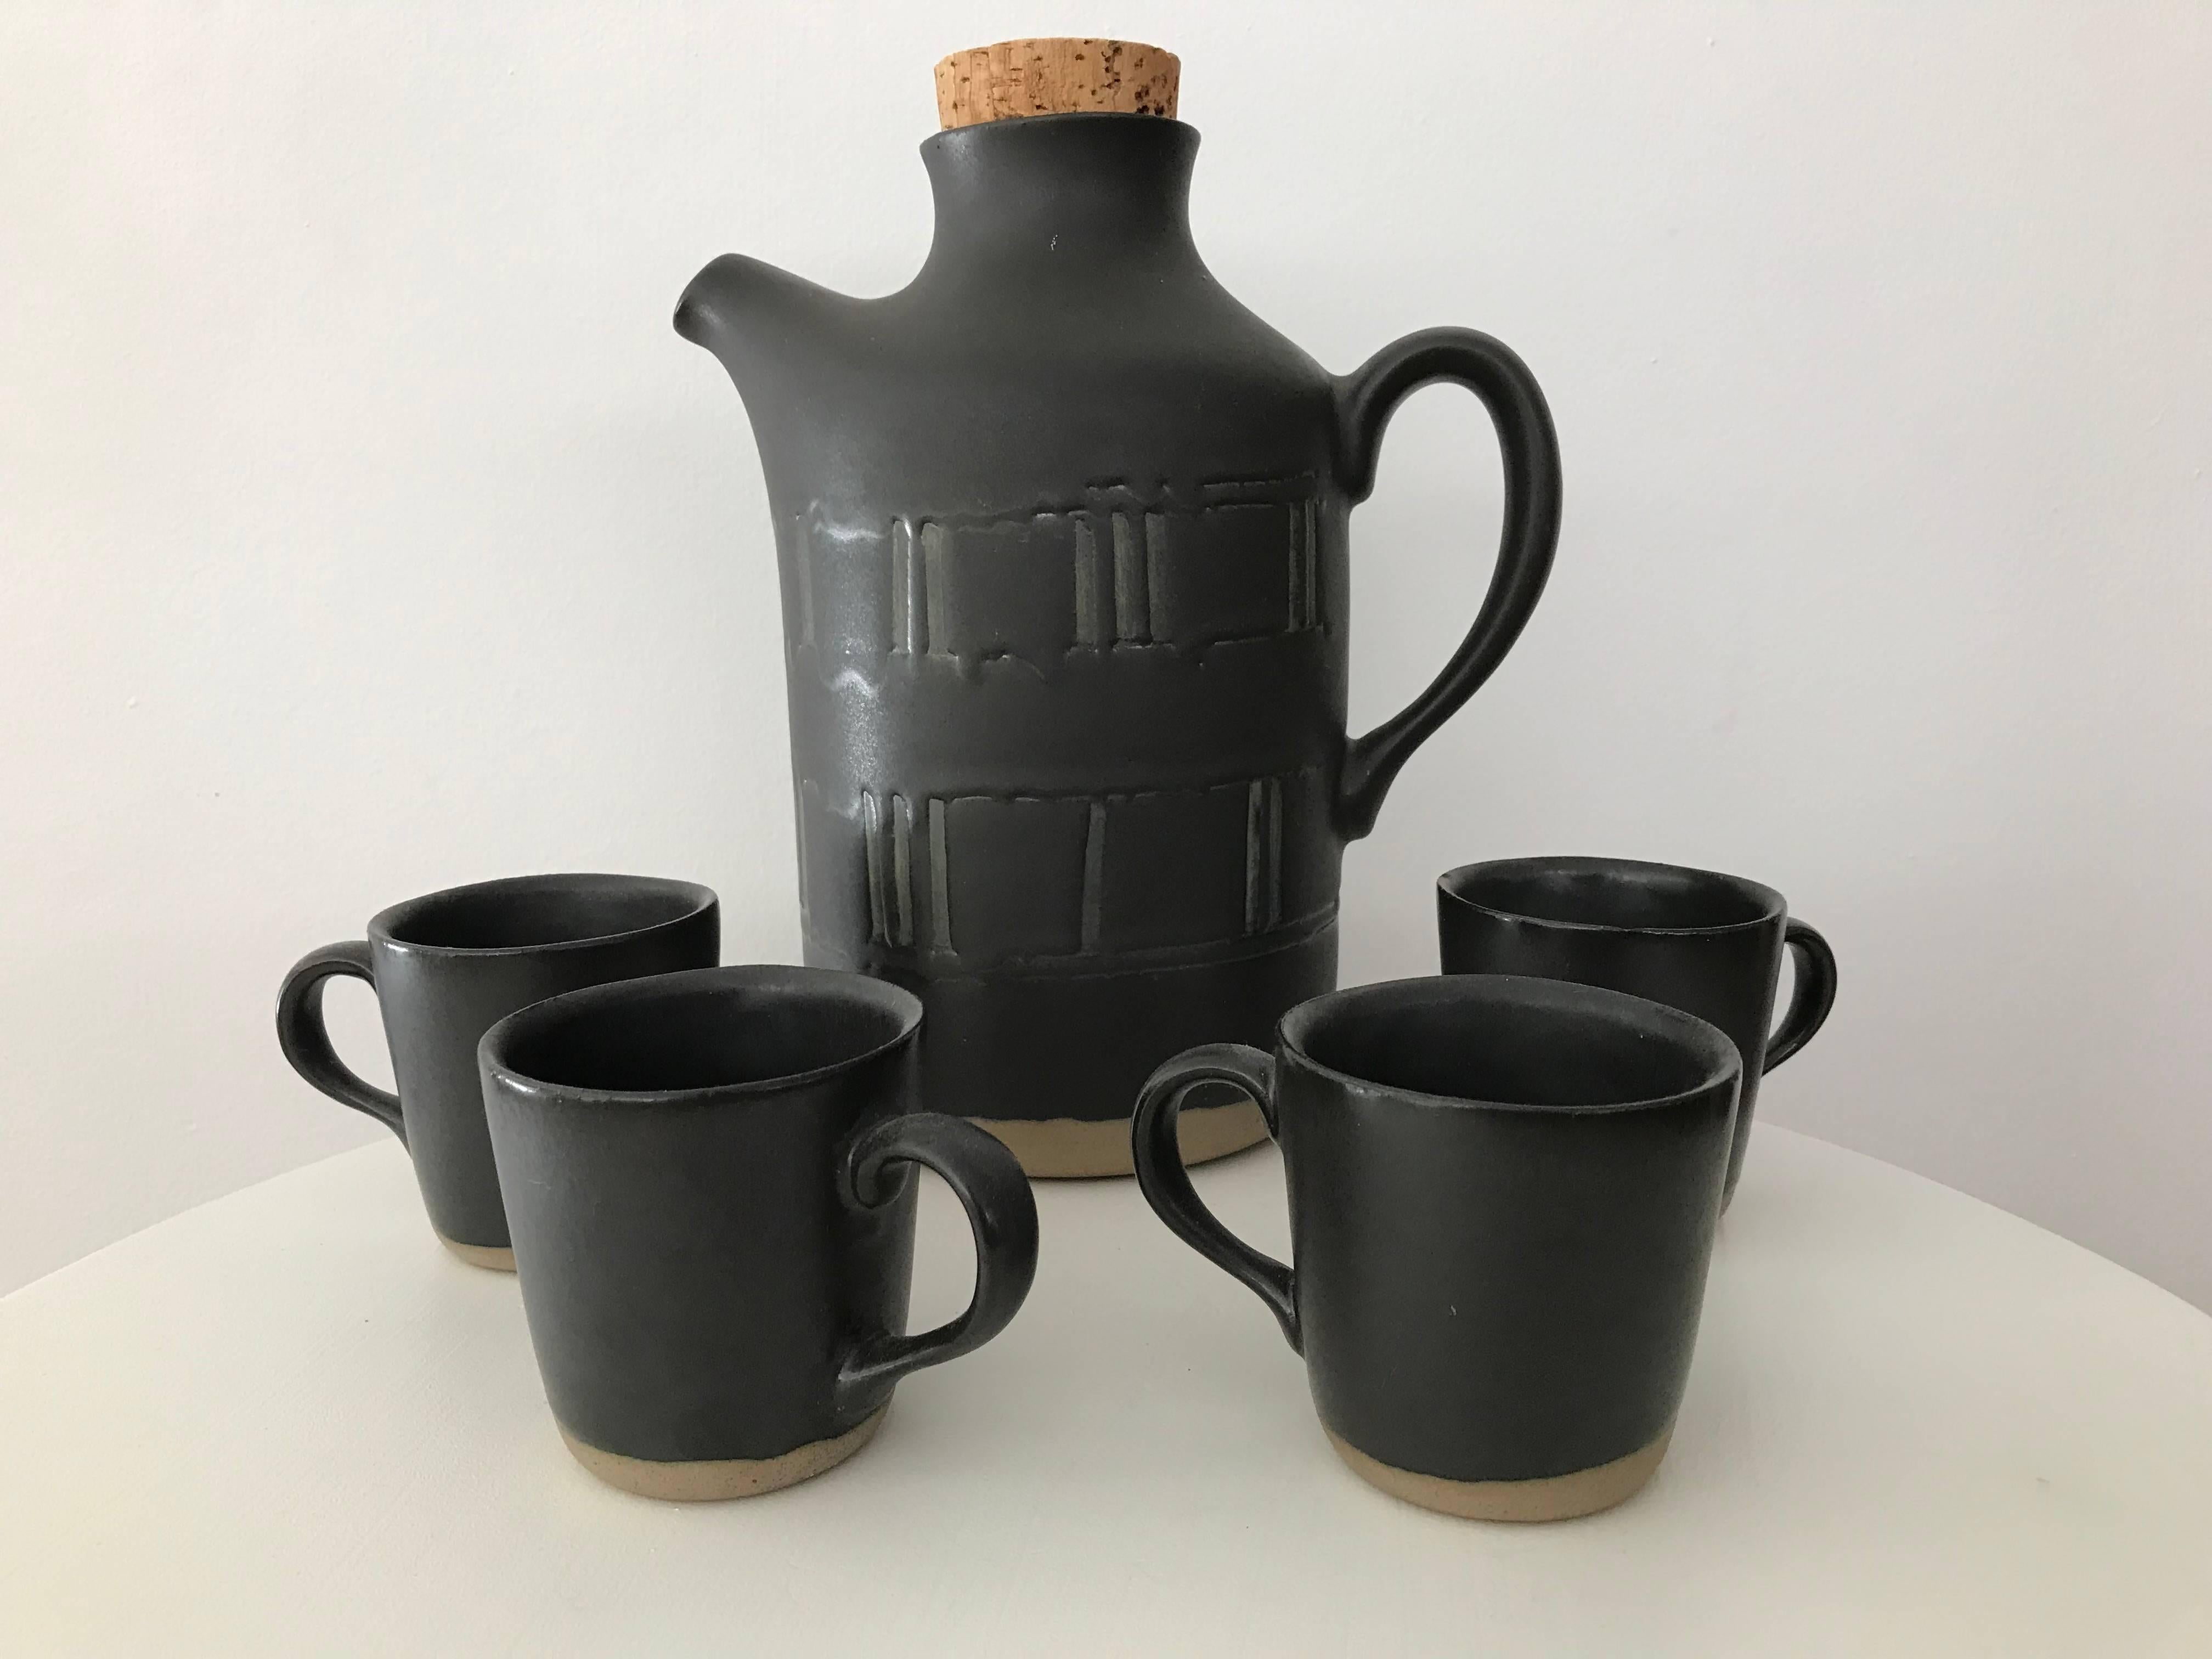 A very nice serving set with a pitcher and four cups by Jane & Gordon Martz for Marshall Studios. Very nice condition with original cork stopper. Pitcher and one cup still have labels. Once cup has a small nick at the rim. Each cup is: four inches